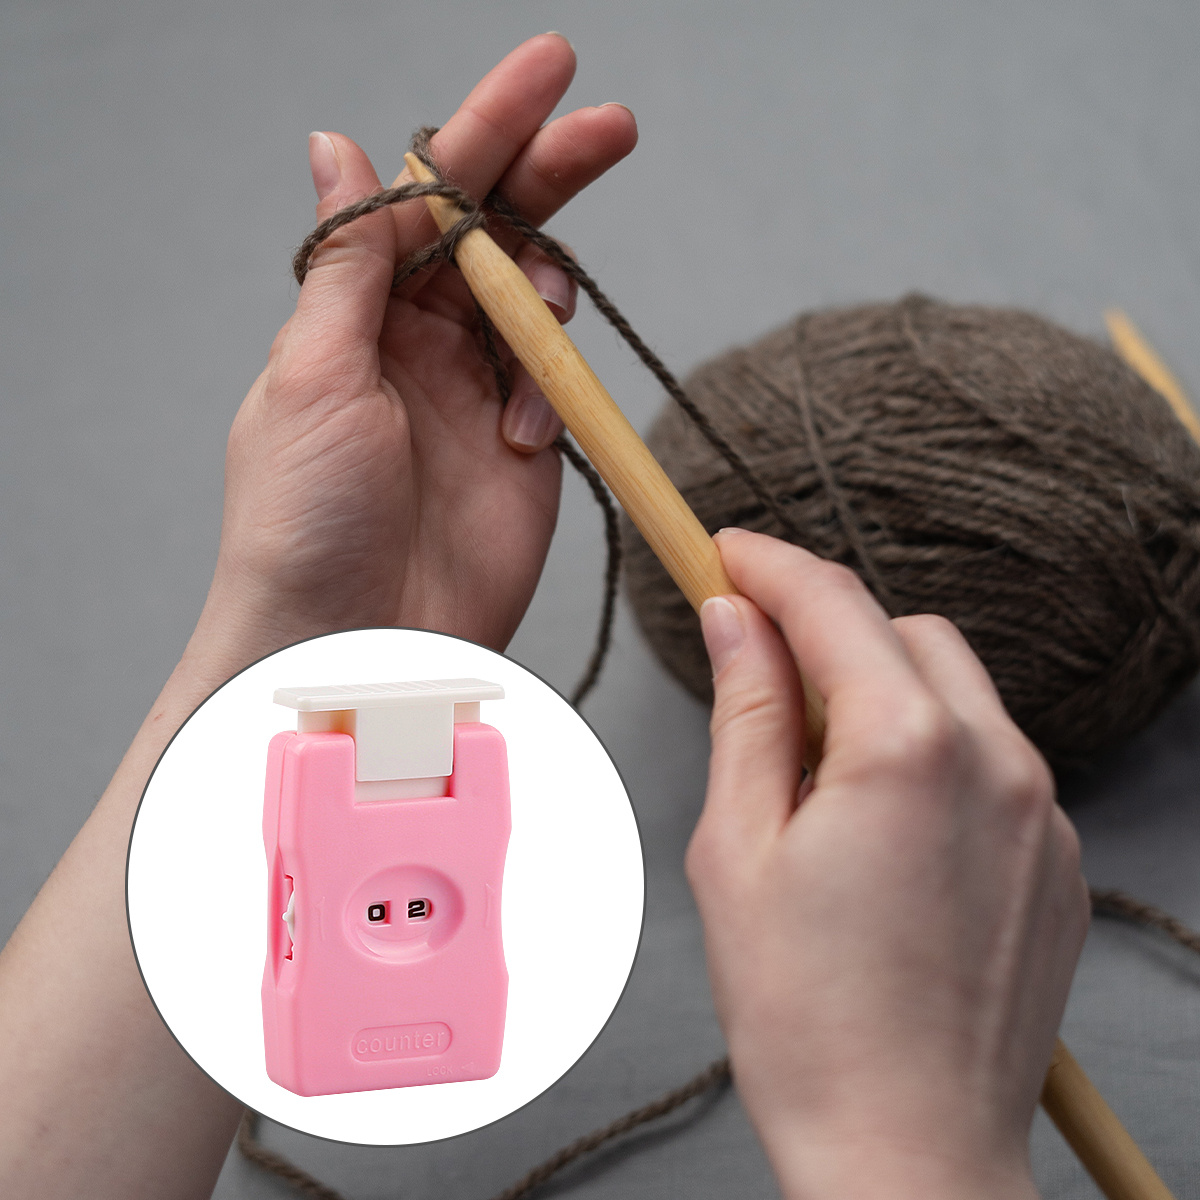 China Factory Plastic Crochet Knitting Stitch Counter, Portable Row  Counters for Sweater Needle Knitting Tool 7.1x4.45x1.4cm in bulk online 